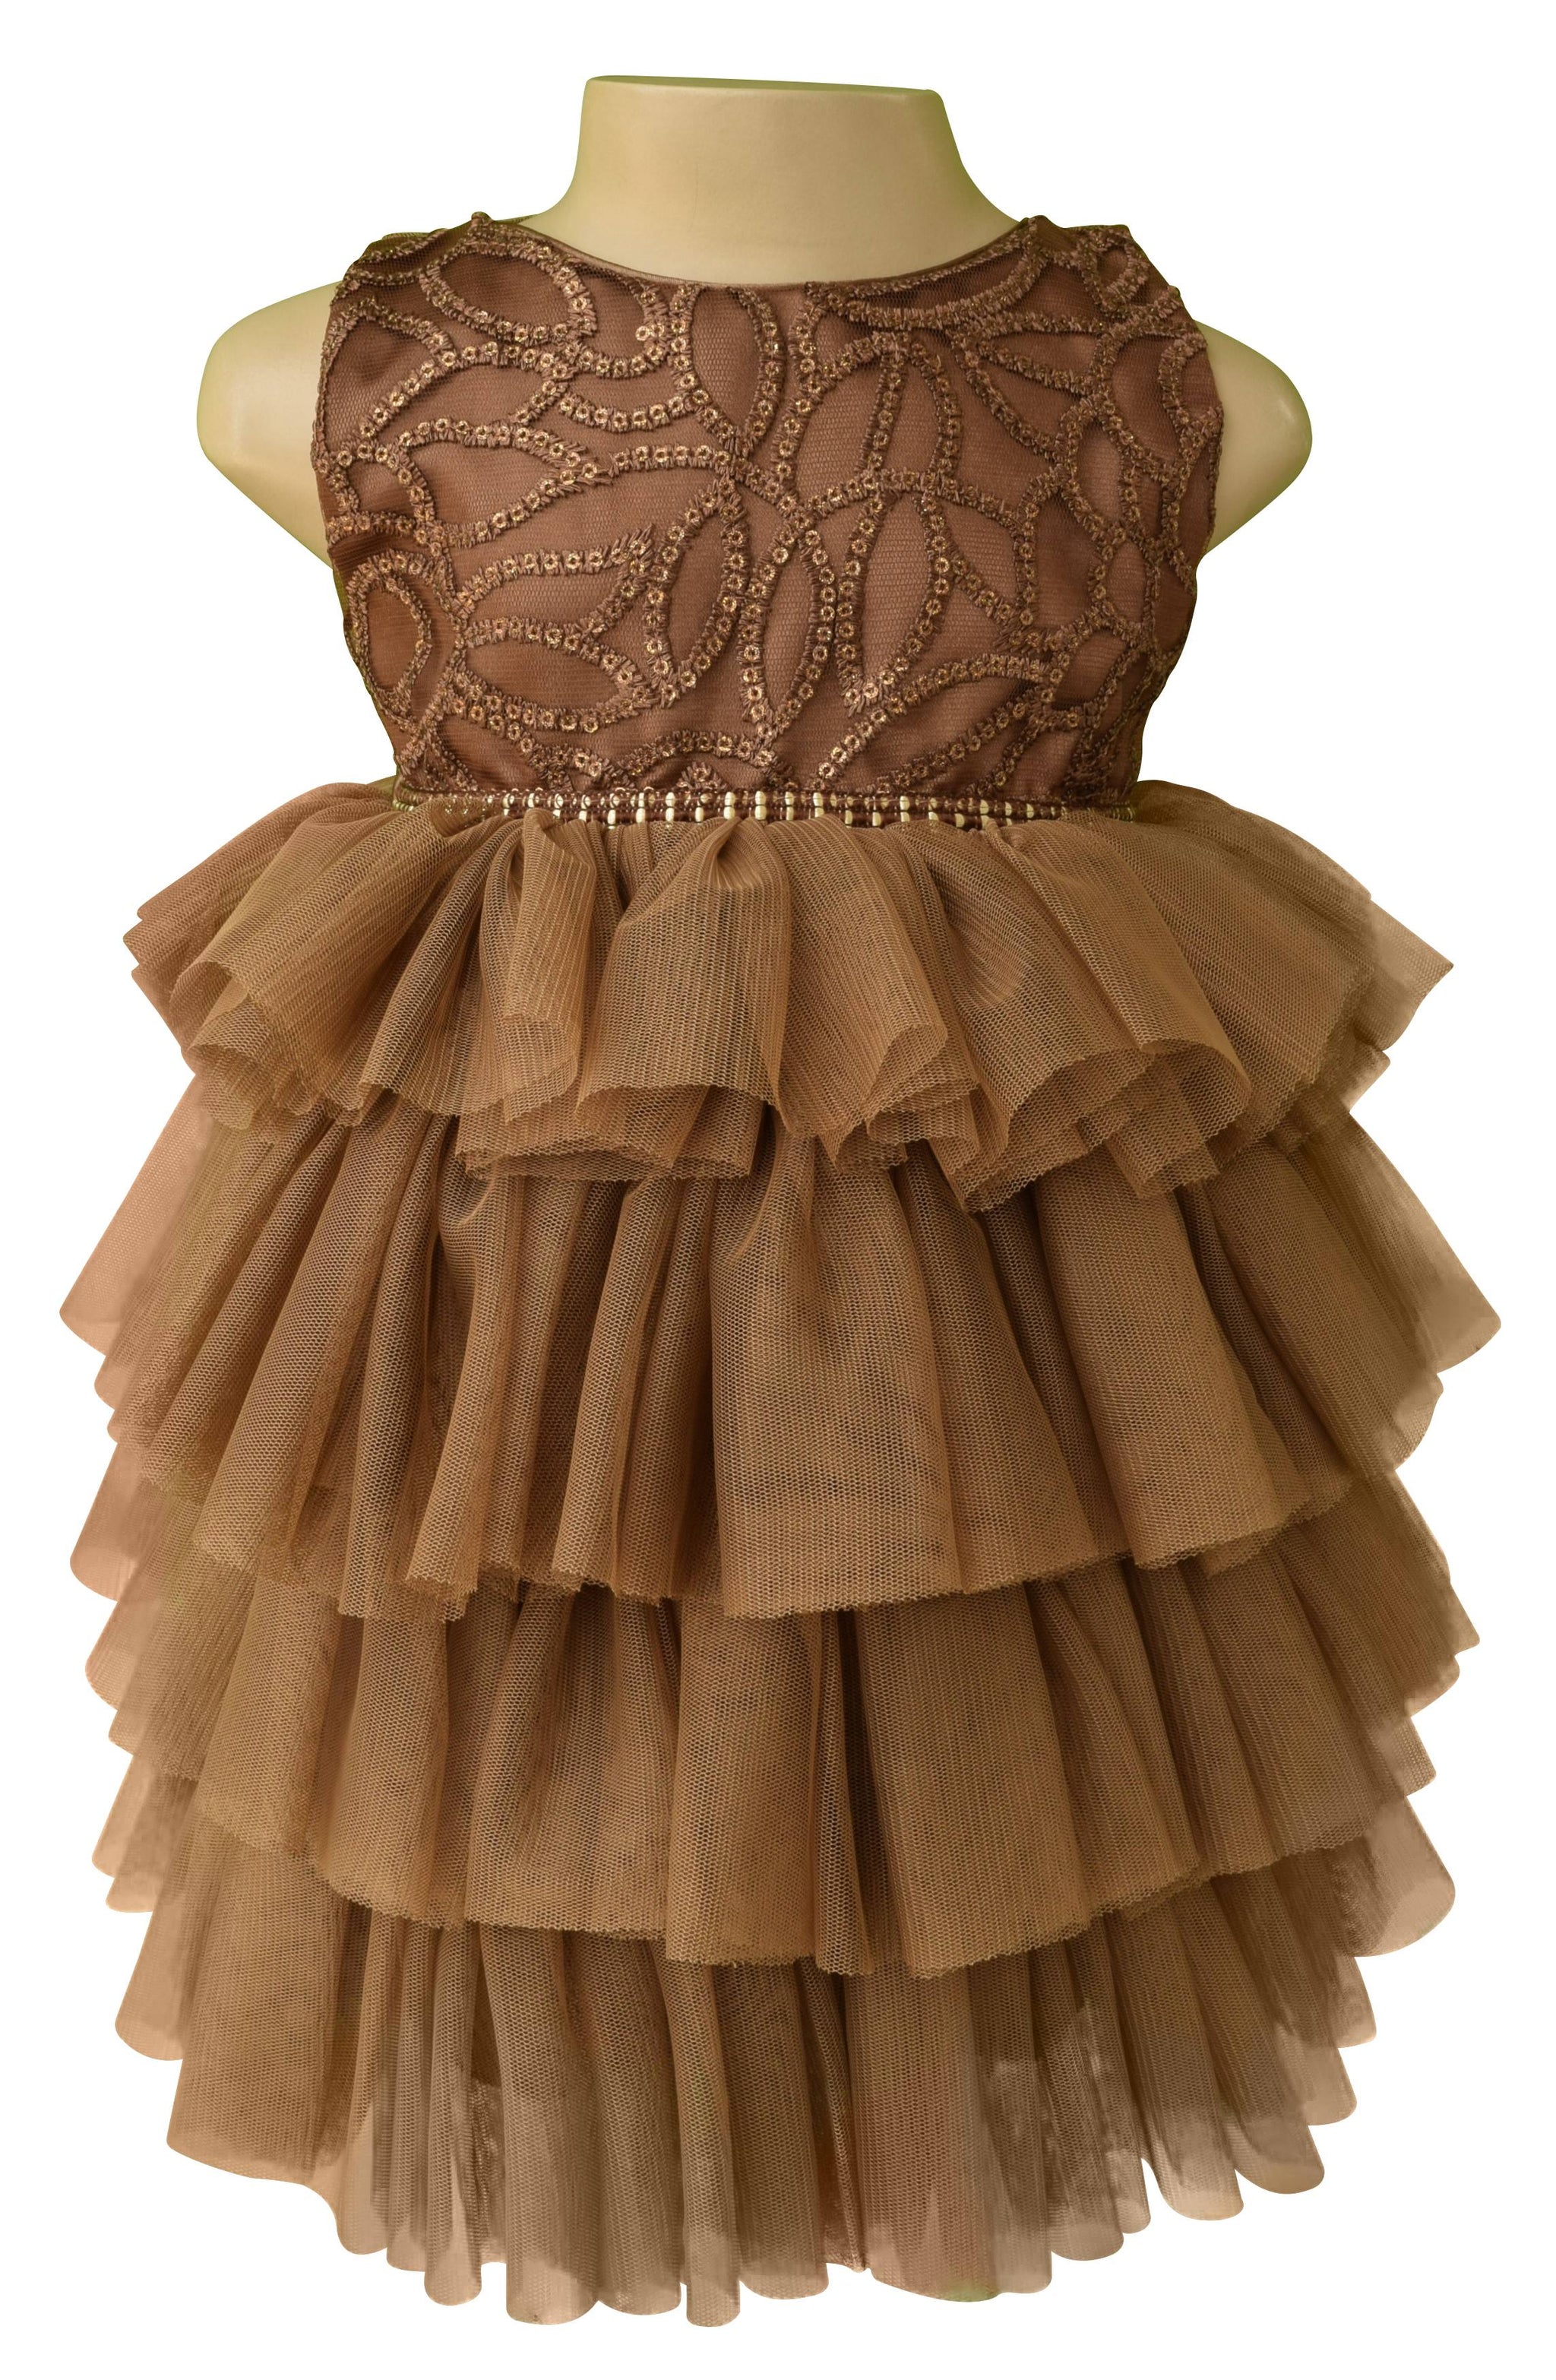 4 year baby dress online shopping